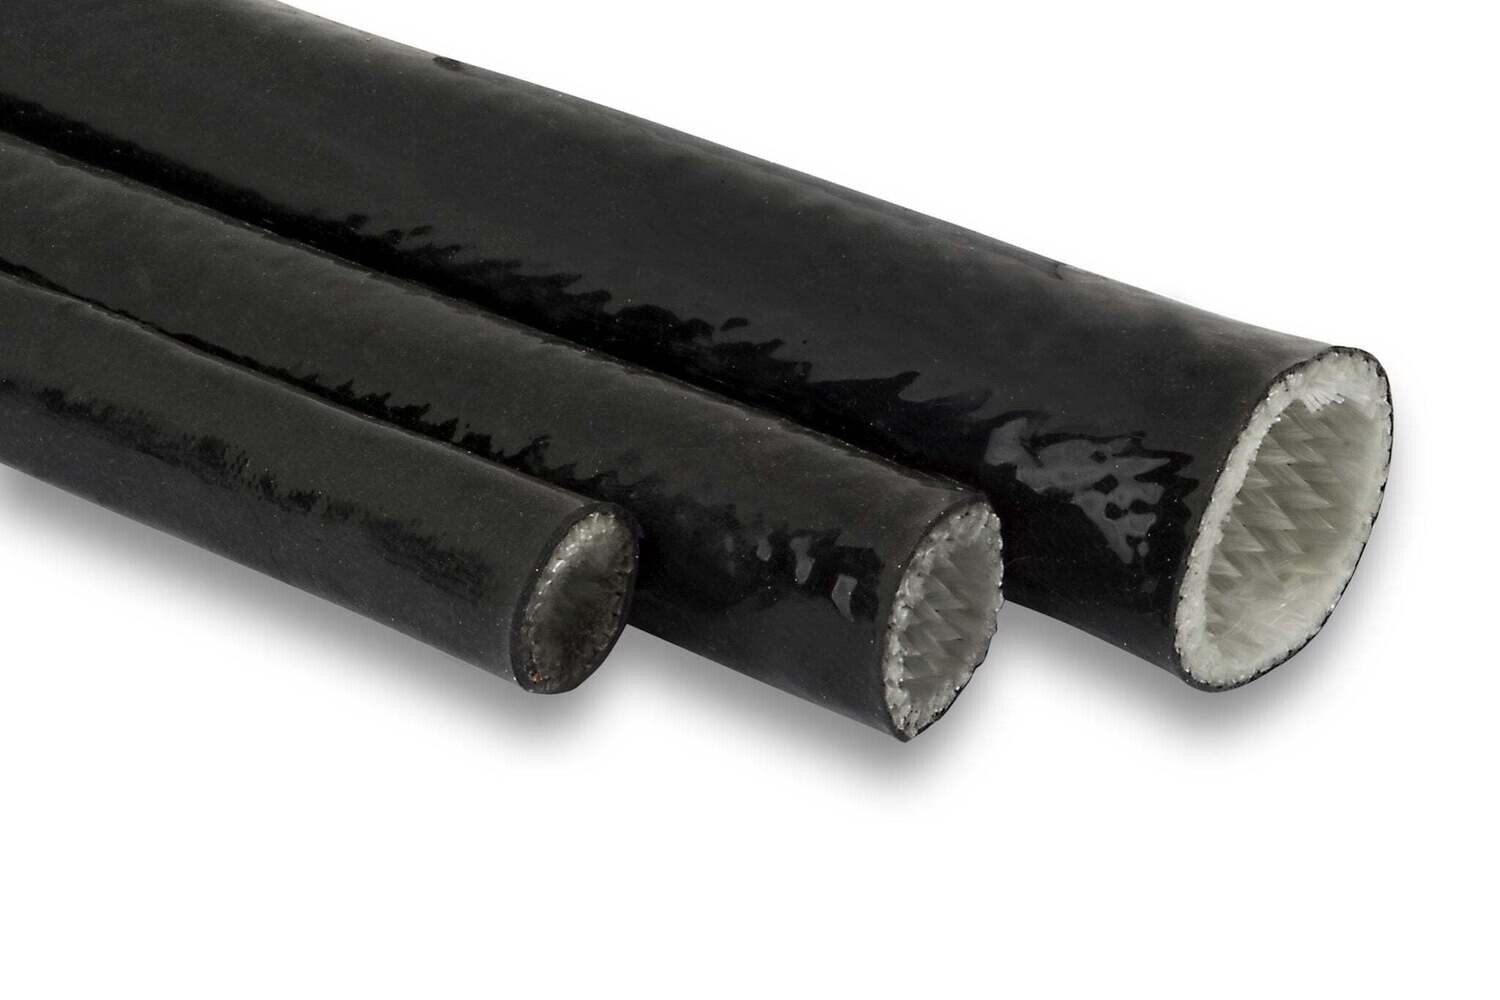 Black Silicon High Heat Sleeve - AN8 (Utilises 15mm Sleeving), 5.0m Multiple Qty will come on a continuous Roll